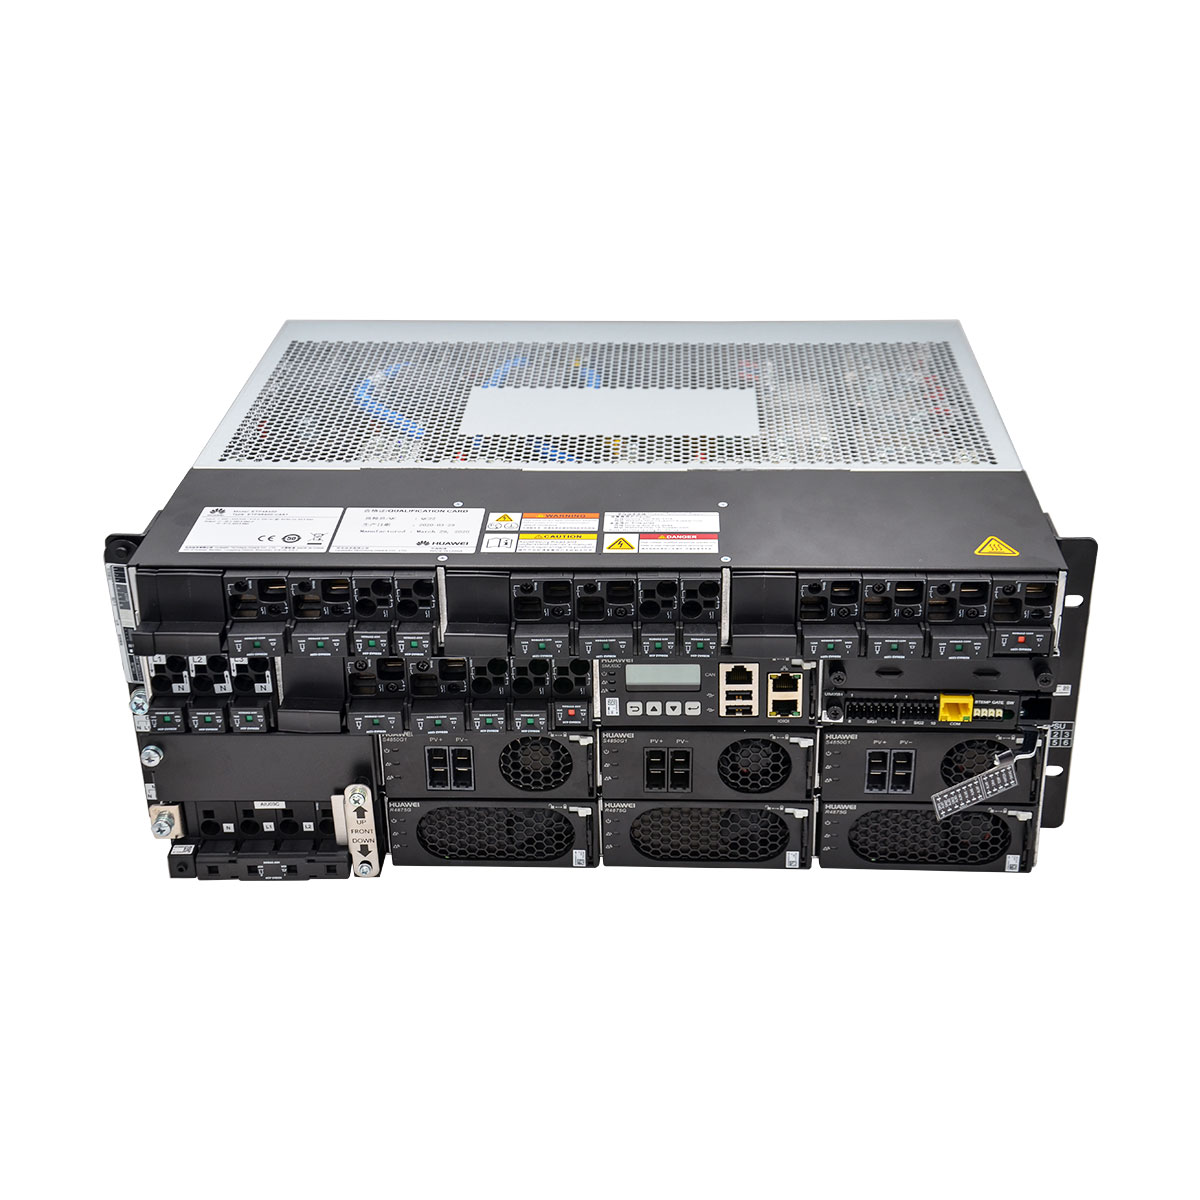 Huawei ETP48400-C4A1 AC/DC Embedded Power System Best Price At Telecomate.com